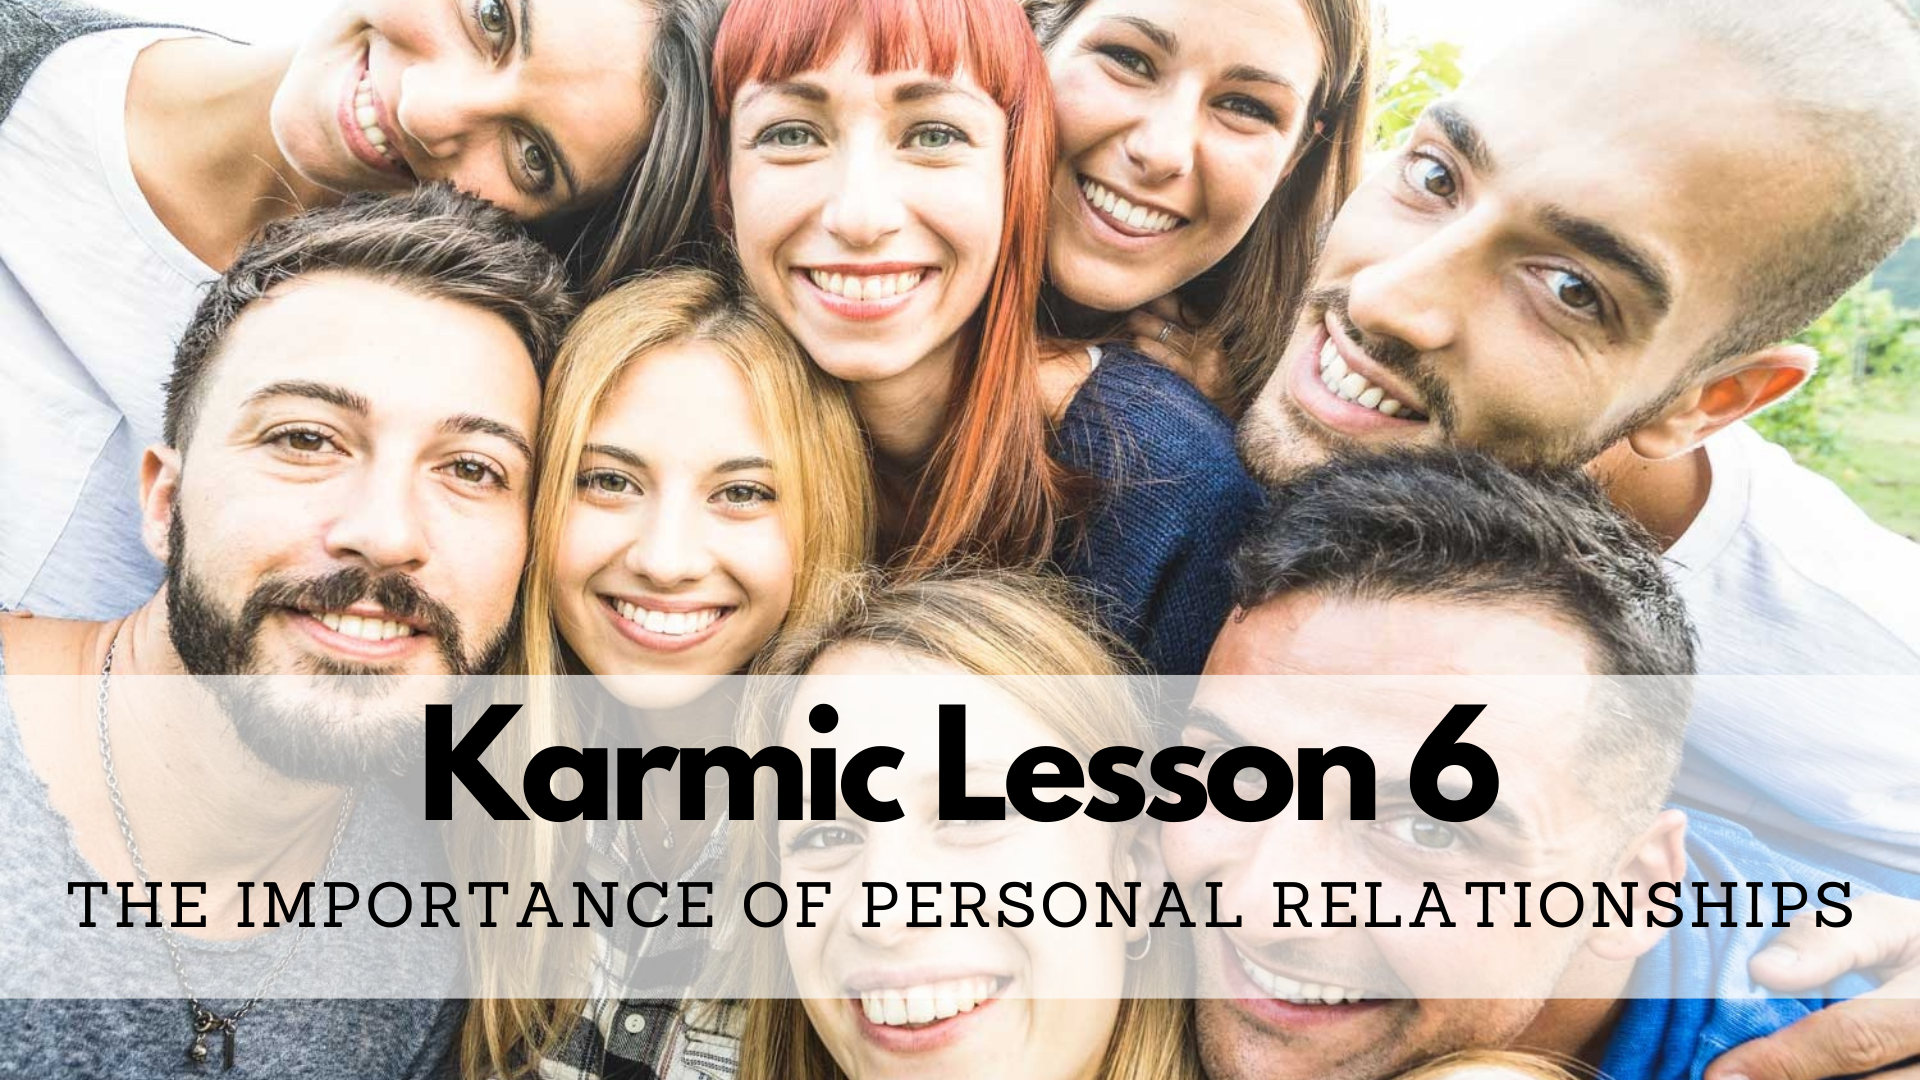 Karmic Lesson 6 - The Importance Of Personal Relationships